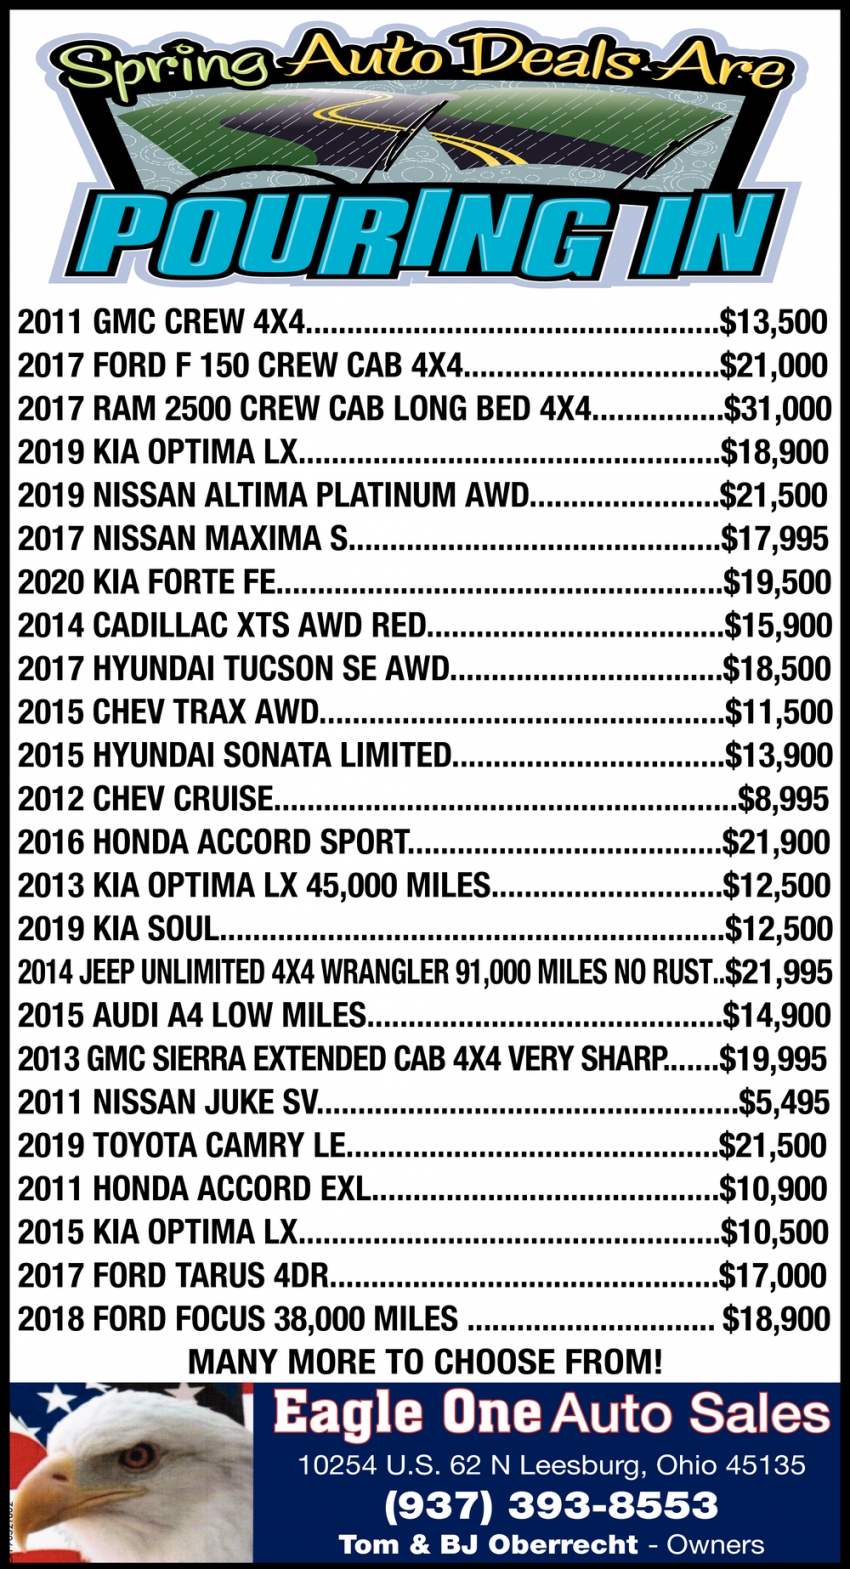 Spring Auto Deals Are Pouring In